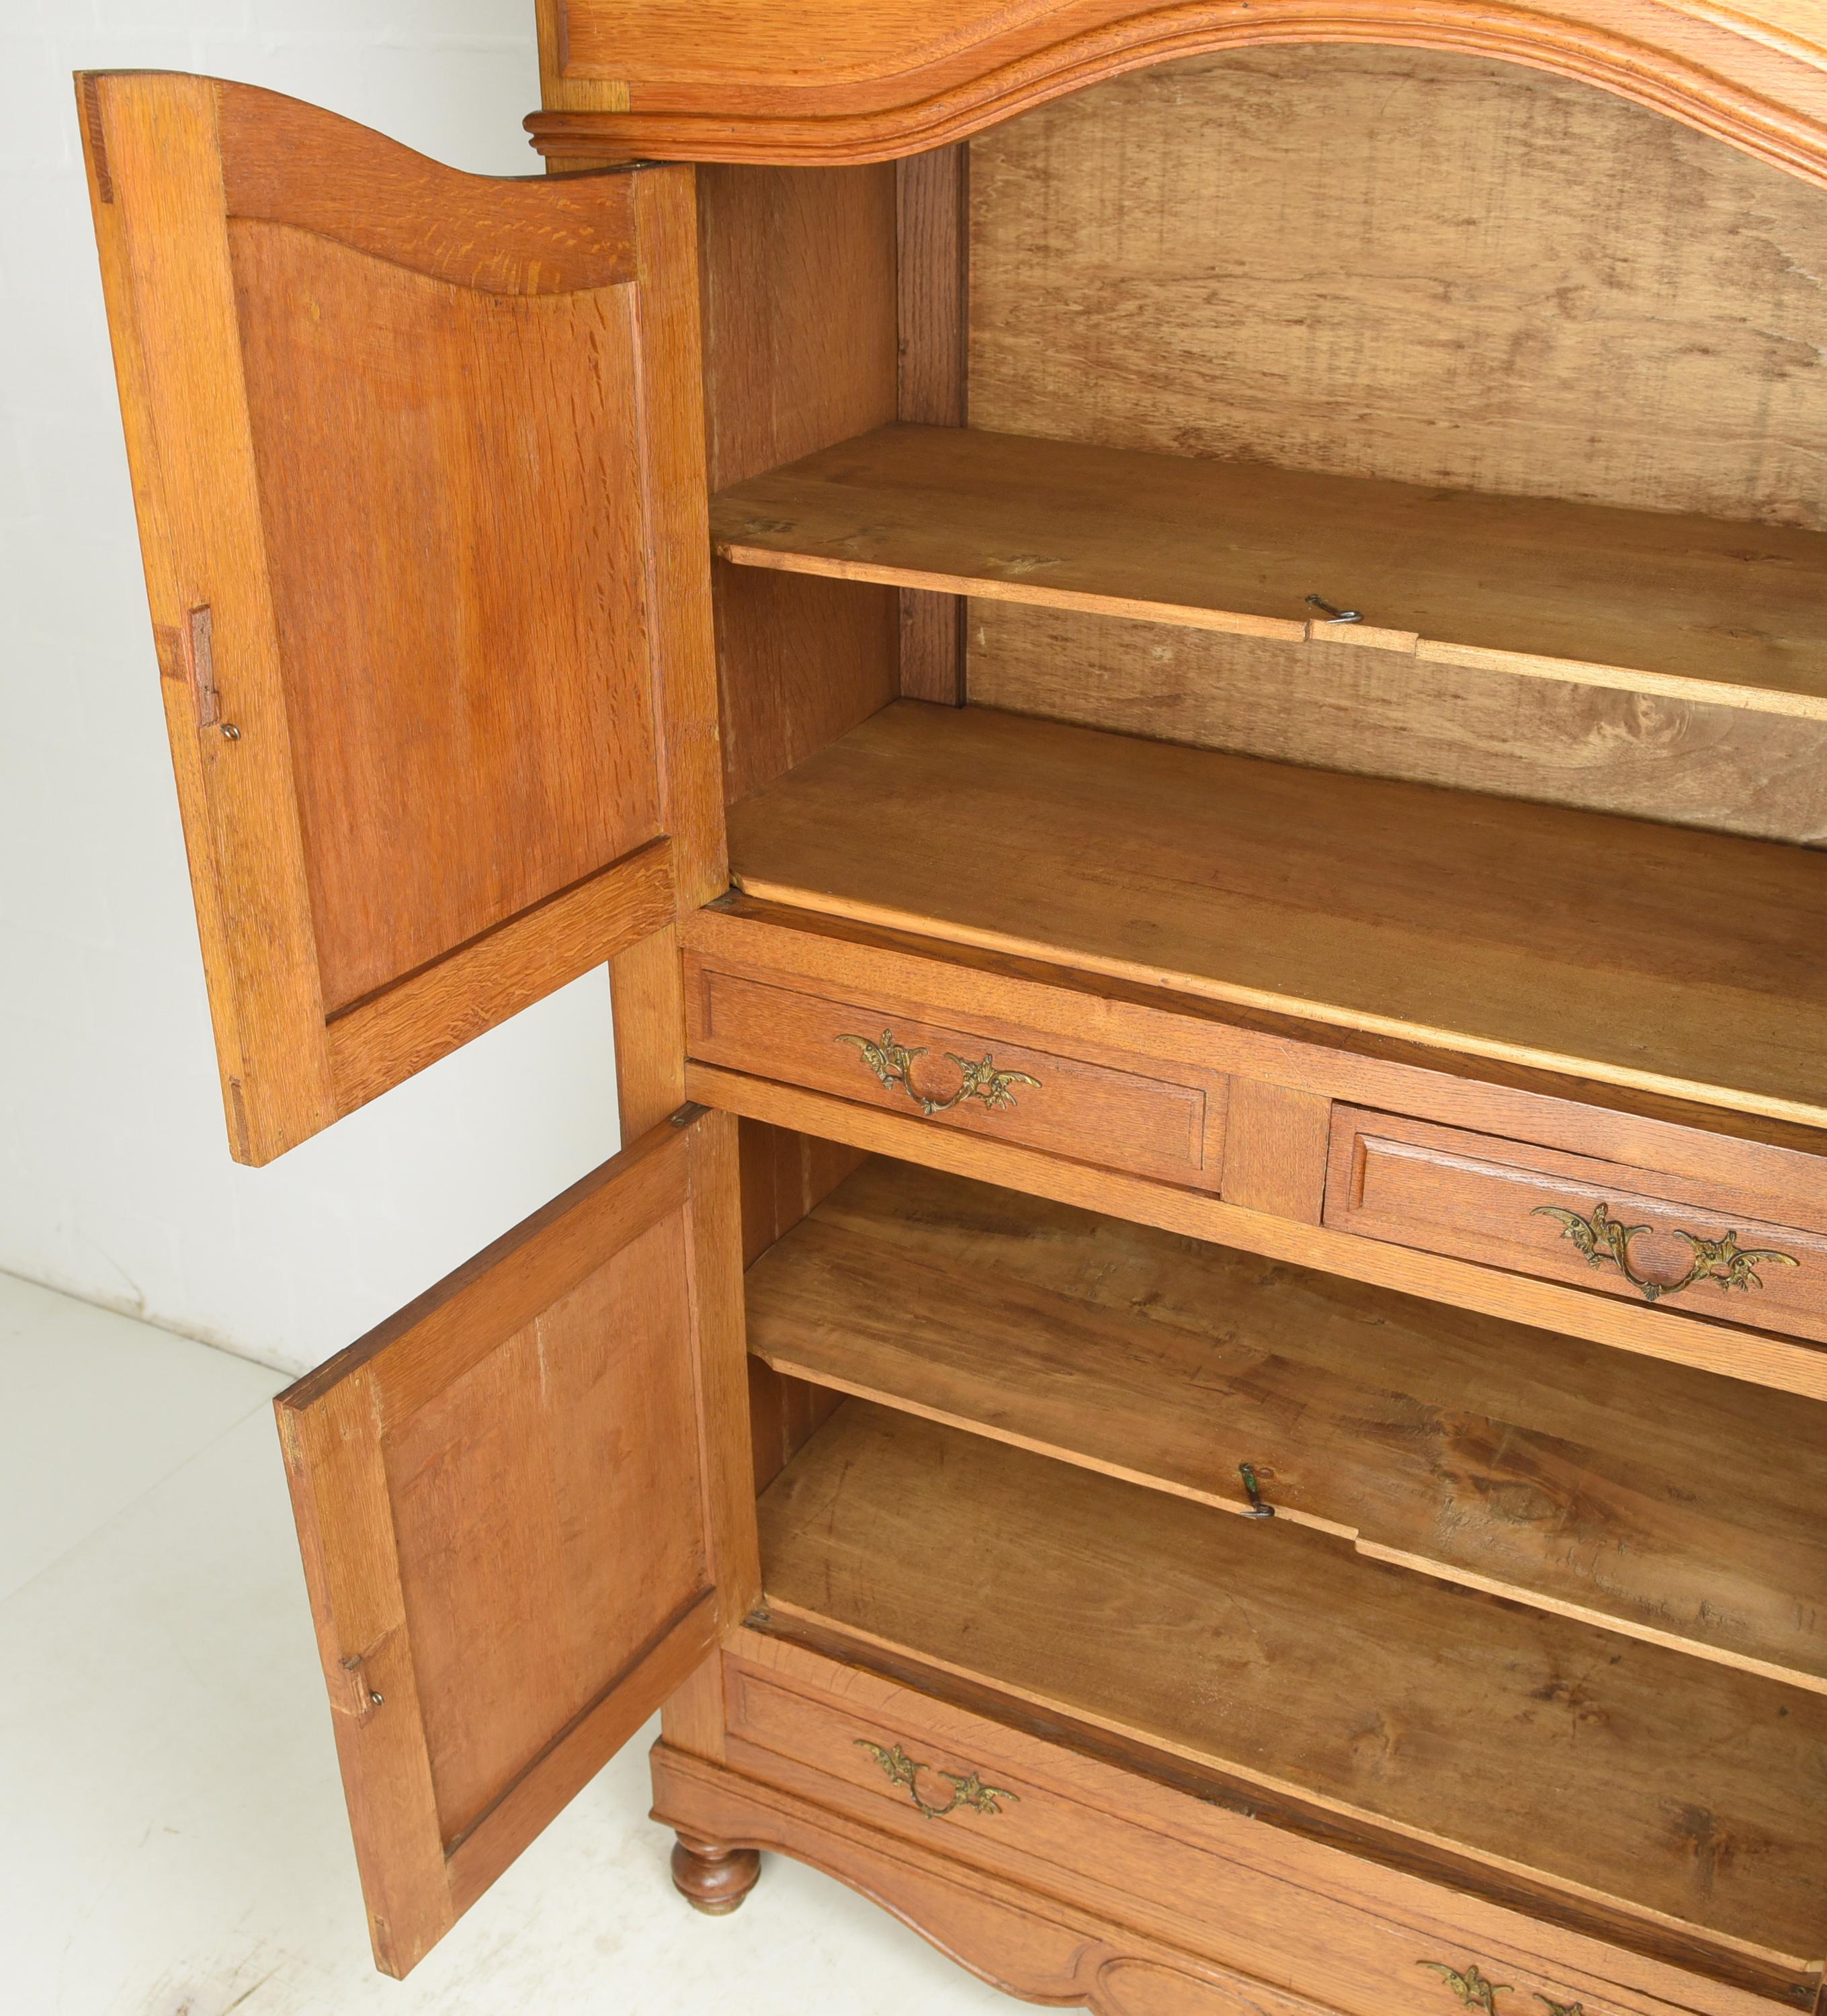 19th Century Vertiko Tall Chest of Drawers / Cupboard in Solid Oak, 1880 For Sale